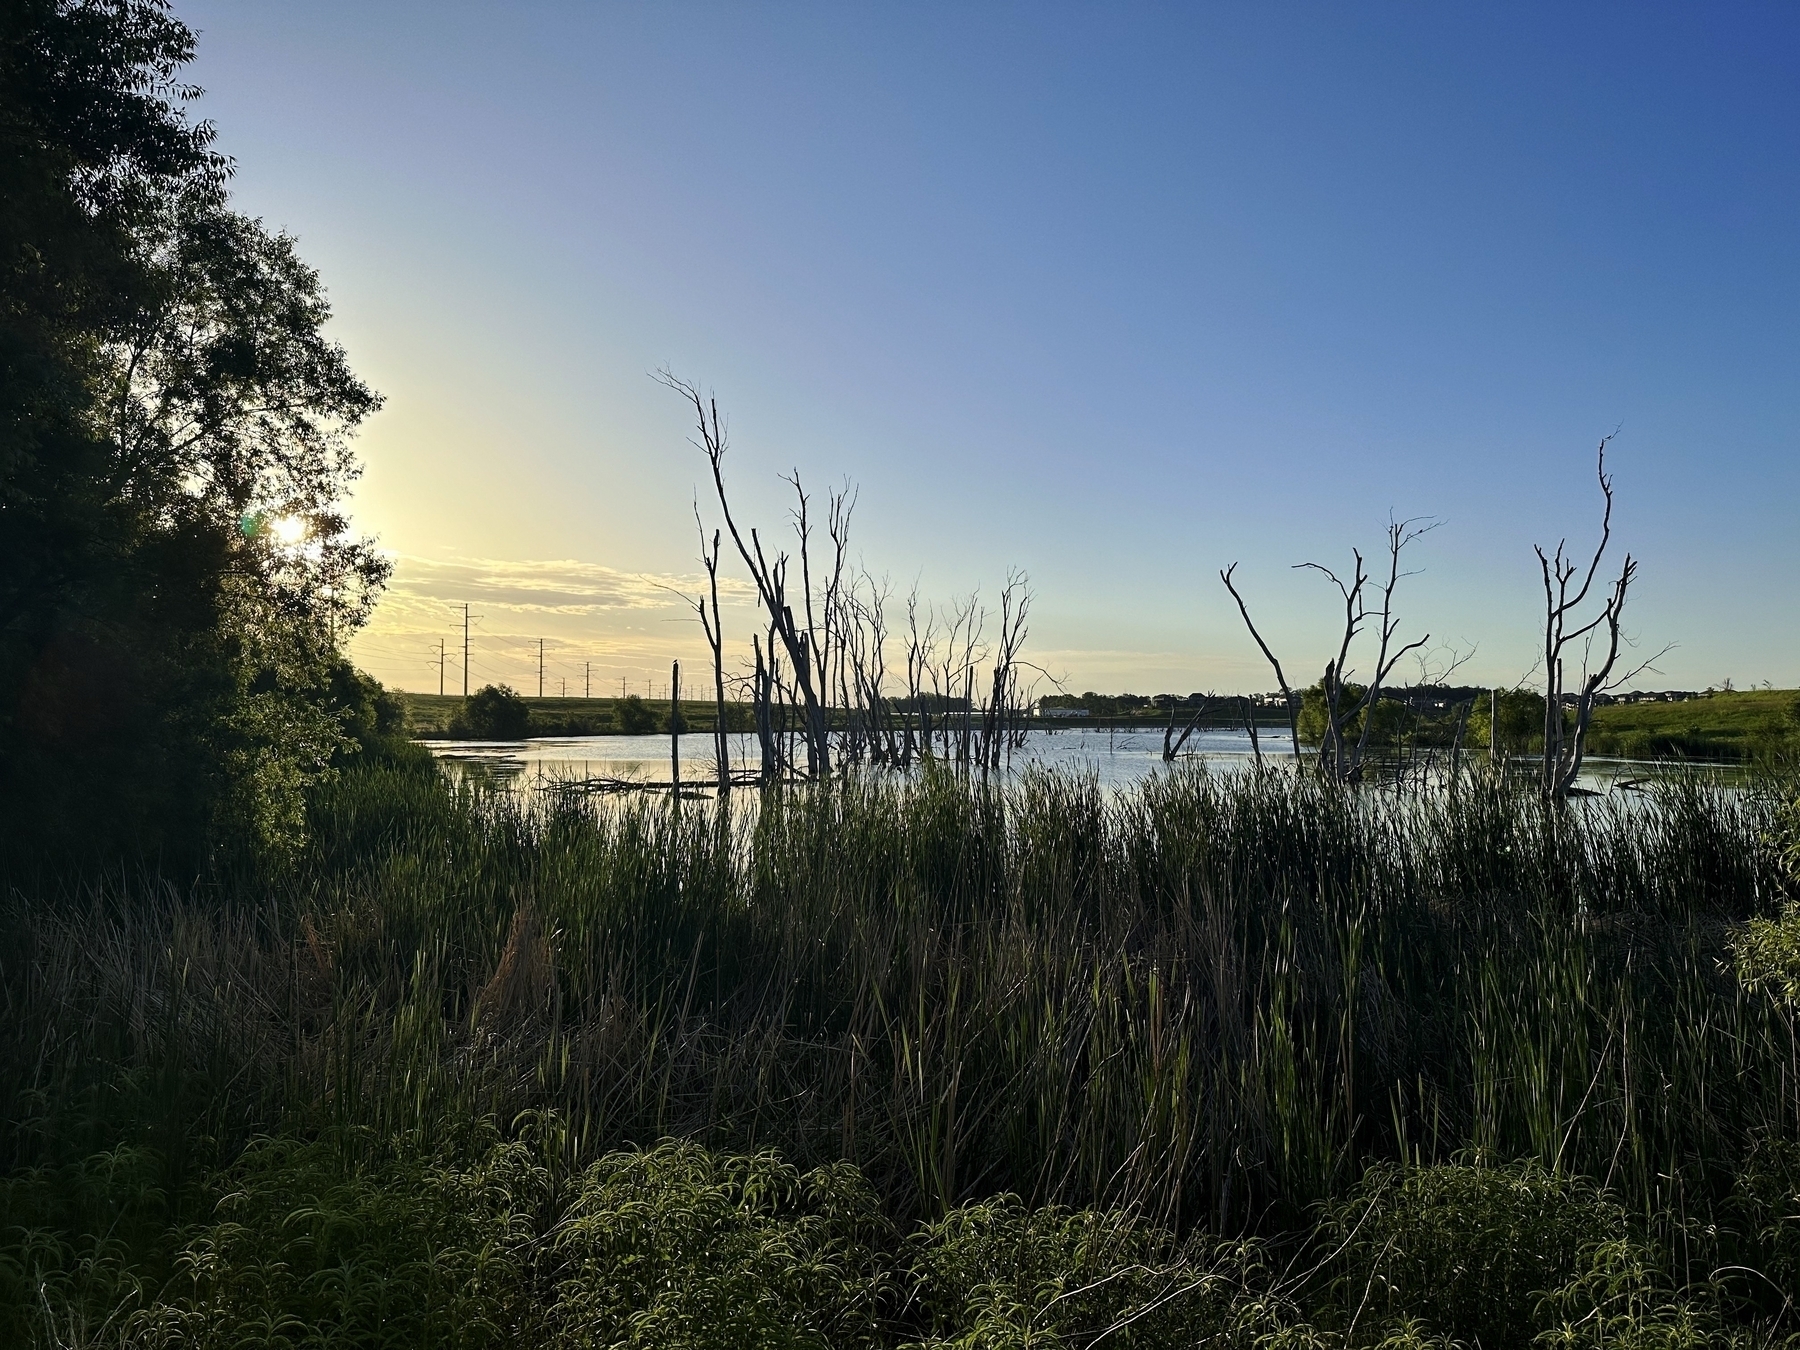 Bare trees stand still in water surrounded by tall grass and vegetation in a wetland area during sunset with a clear sky and distant power lines.